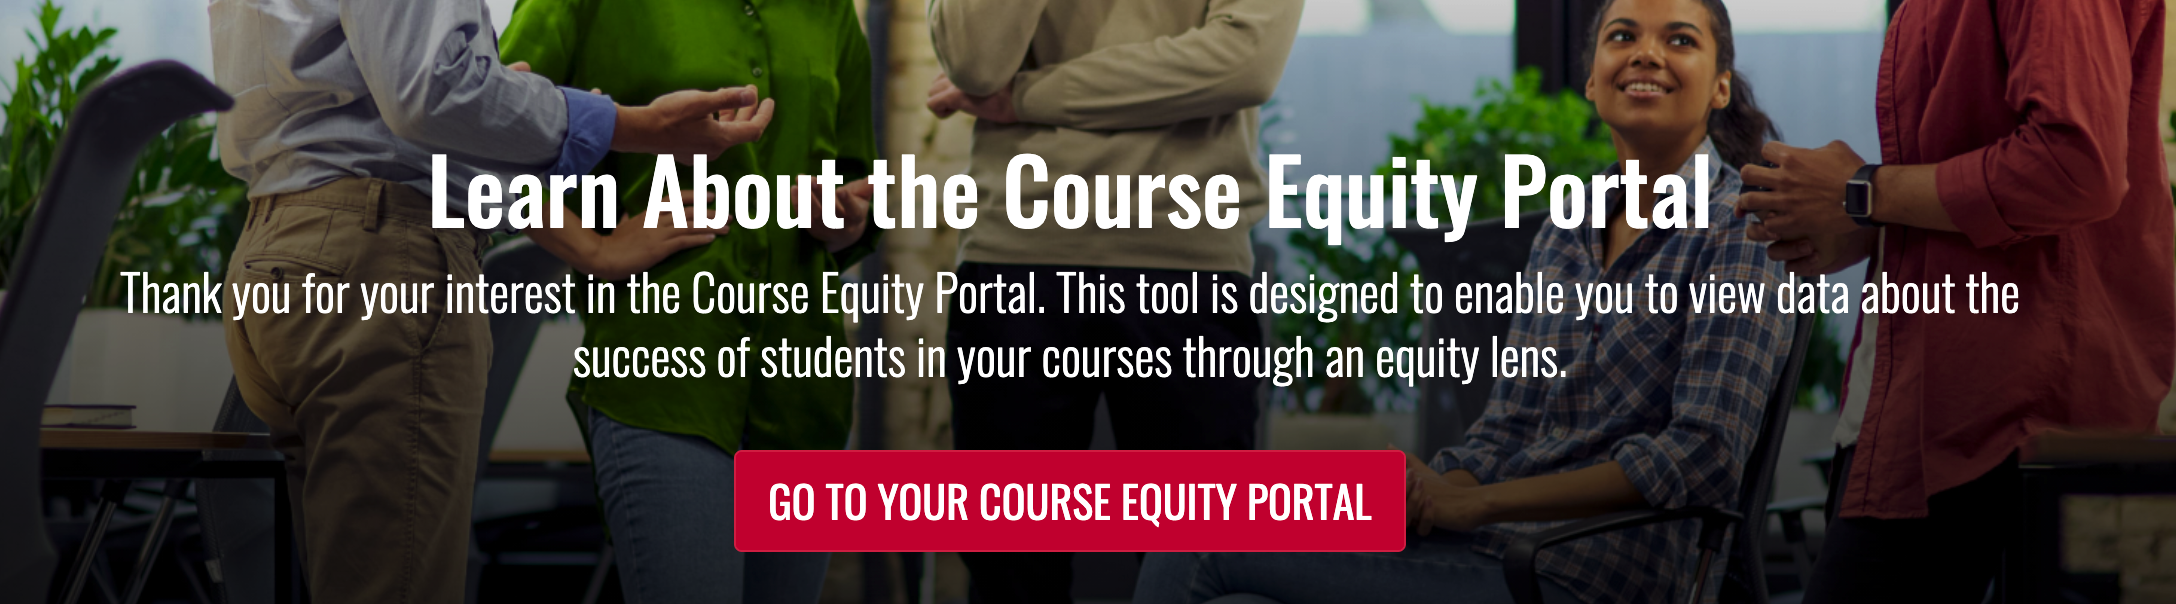 Course Equity Portal.png